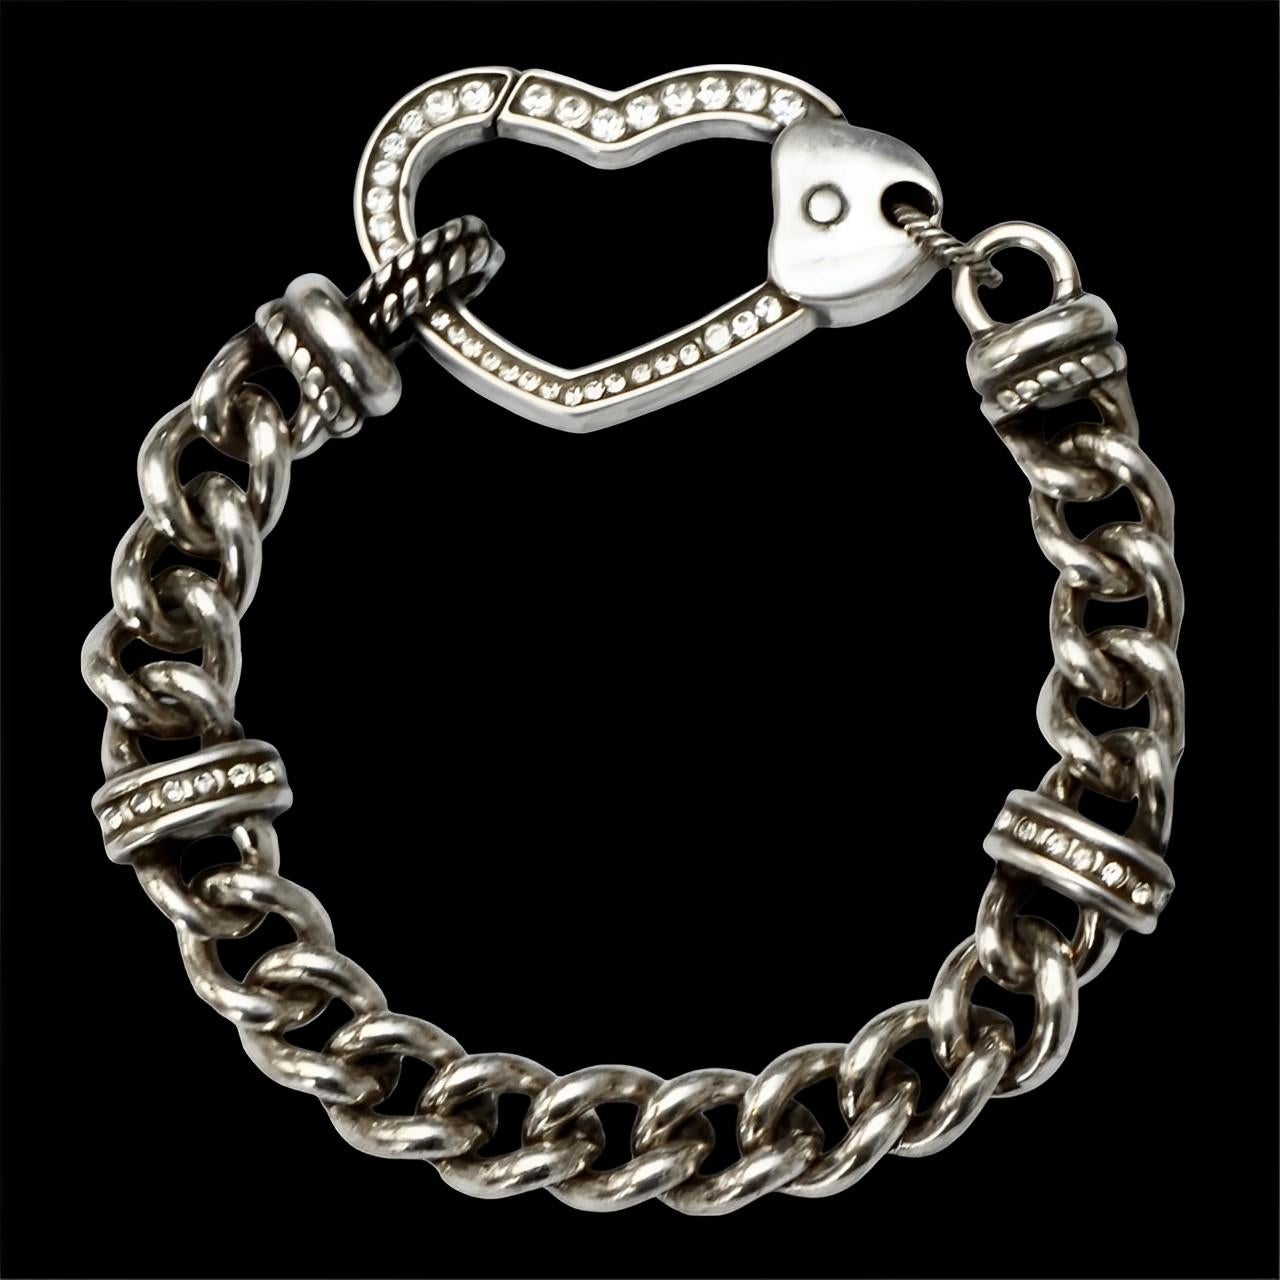 Silver and Clear Rhinestones Curb Link Bracelet with a Large Heart Clasp For Sale 4